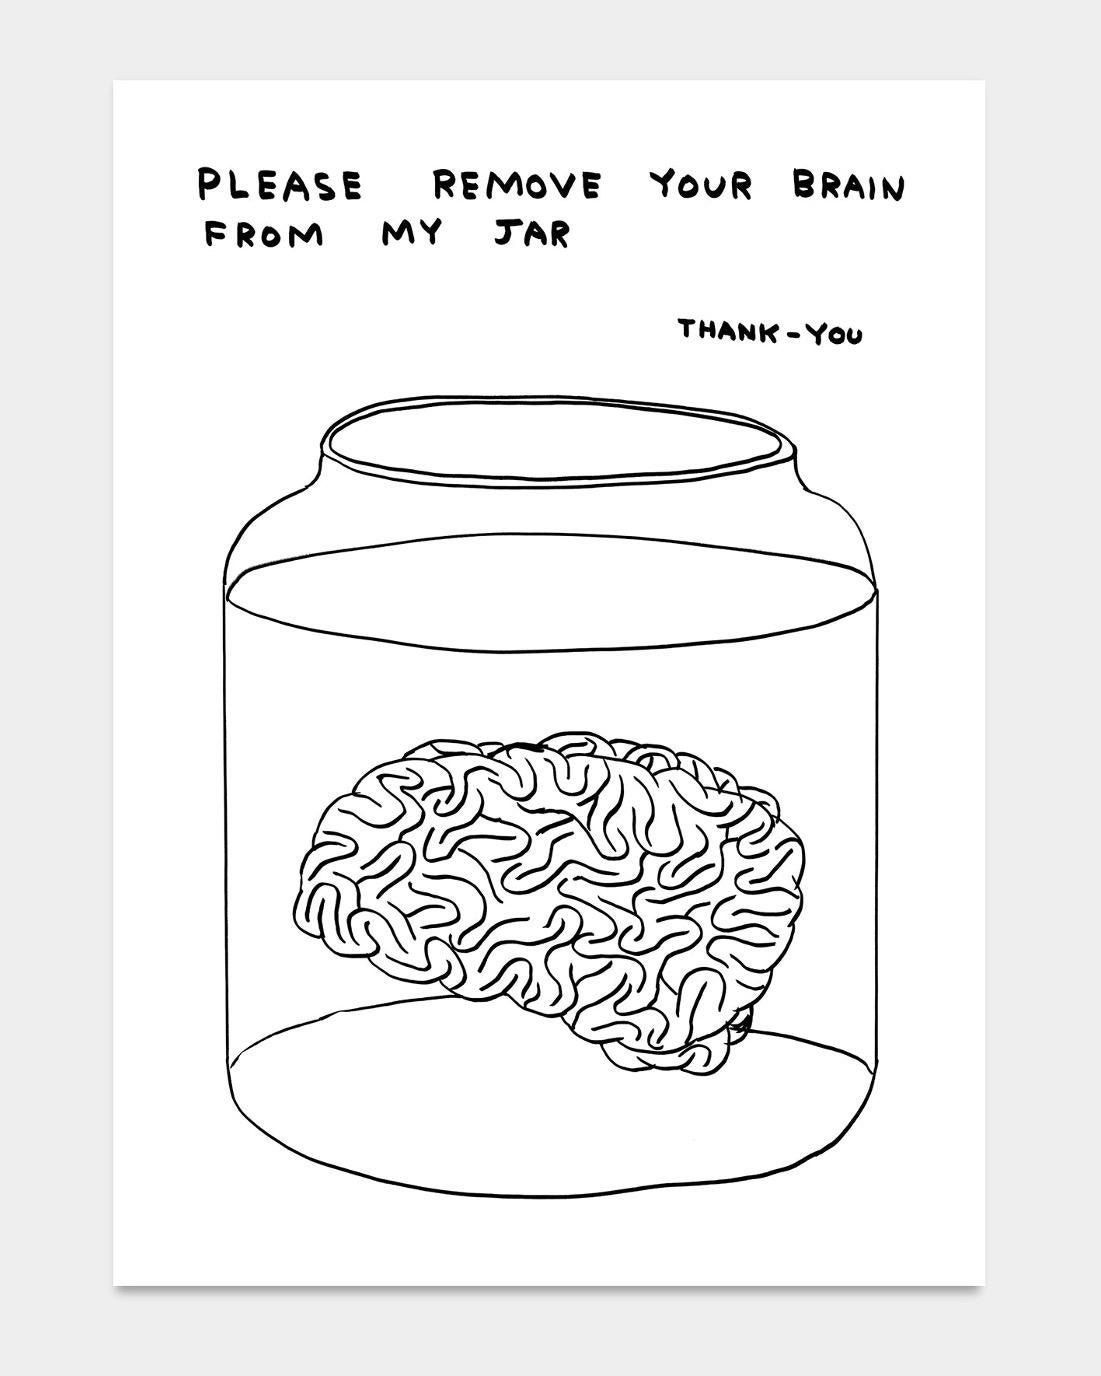 David Shrigley
Please Remove Your Brain From My Jar, 2020
70 x 50 cm
Off-set lithography
Printed on 200g Munken Lynx
